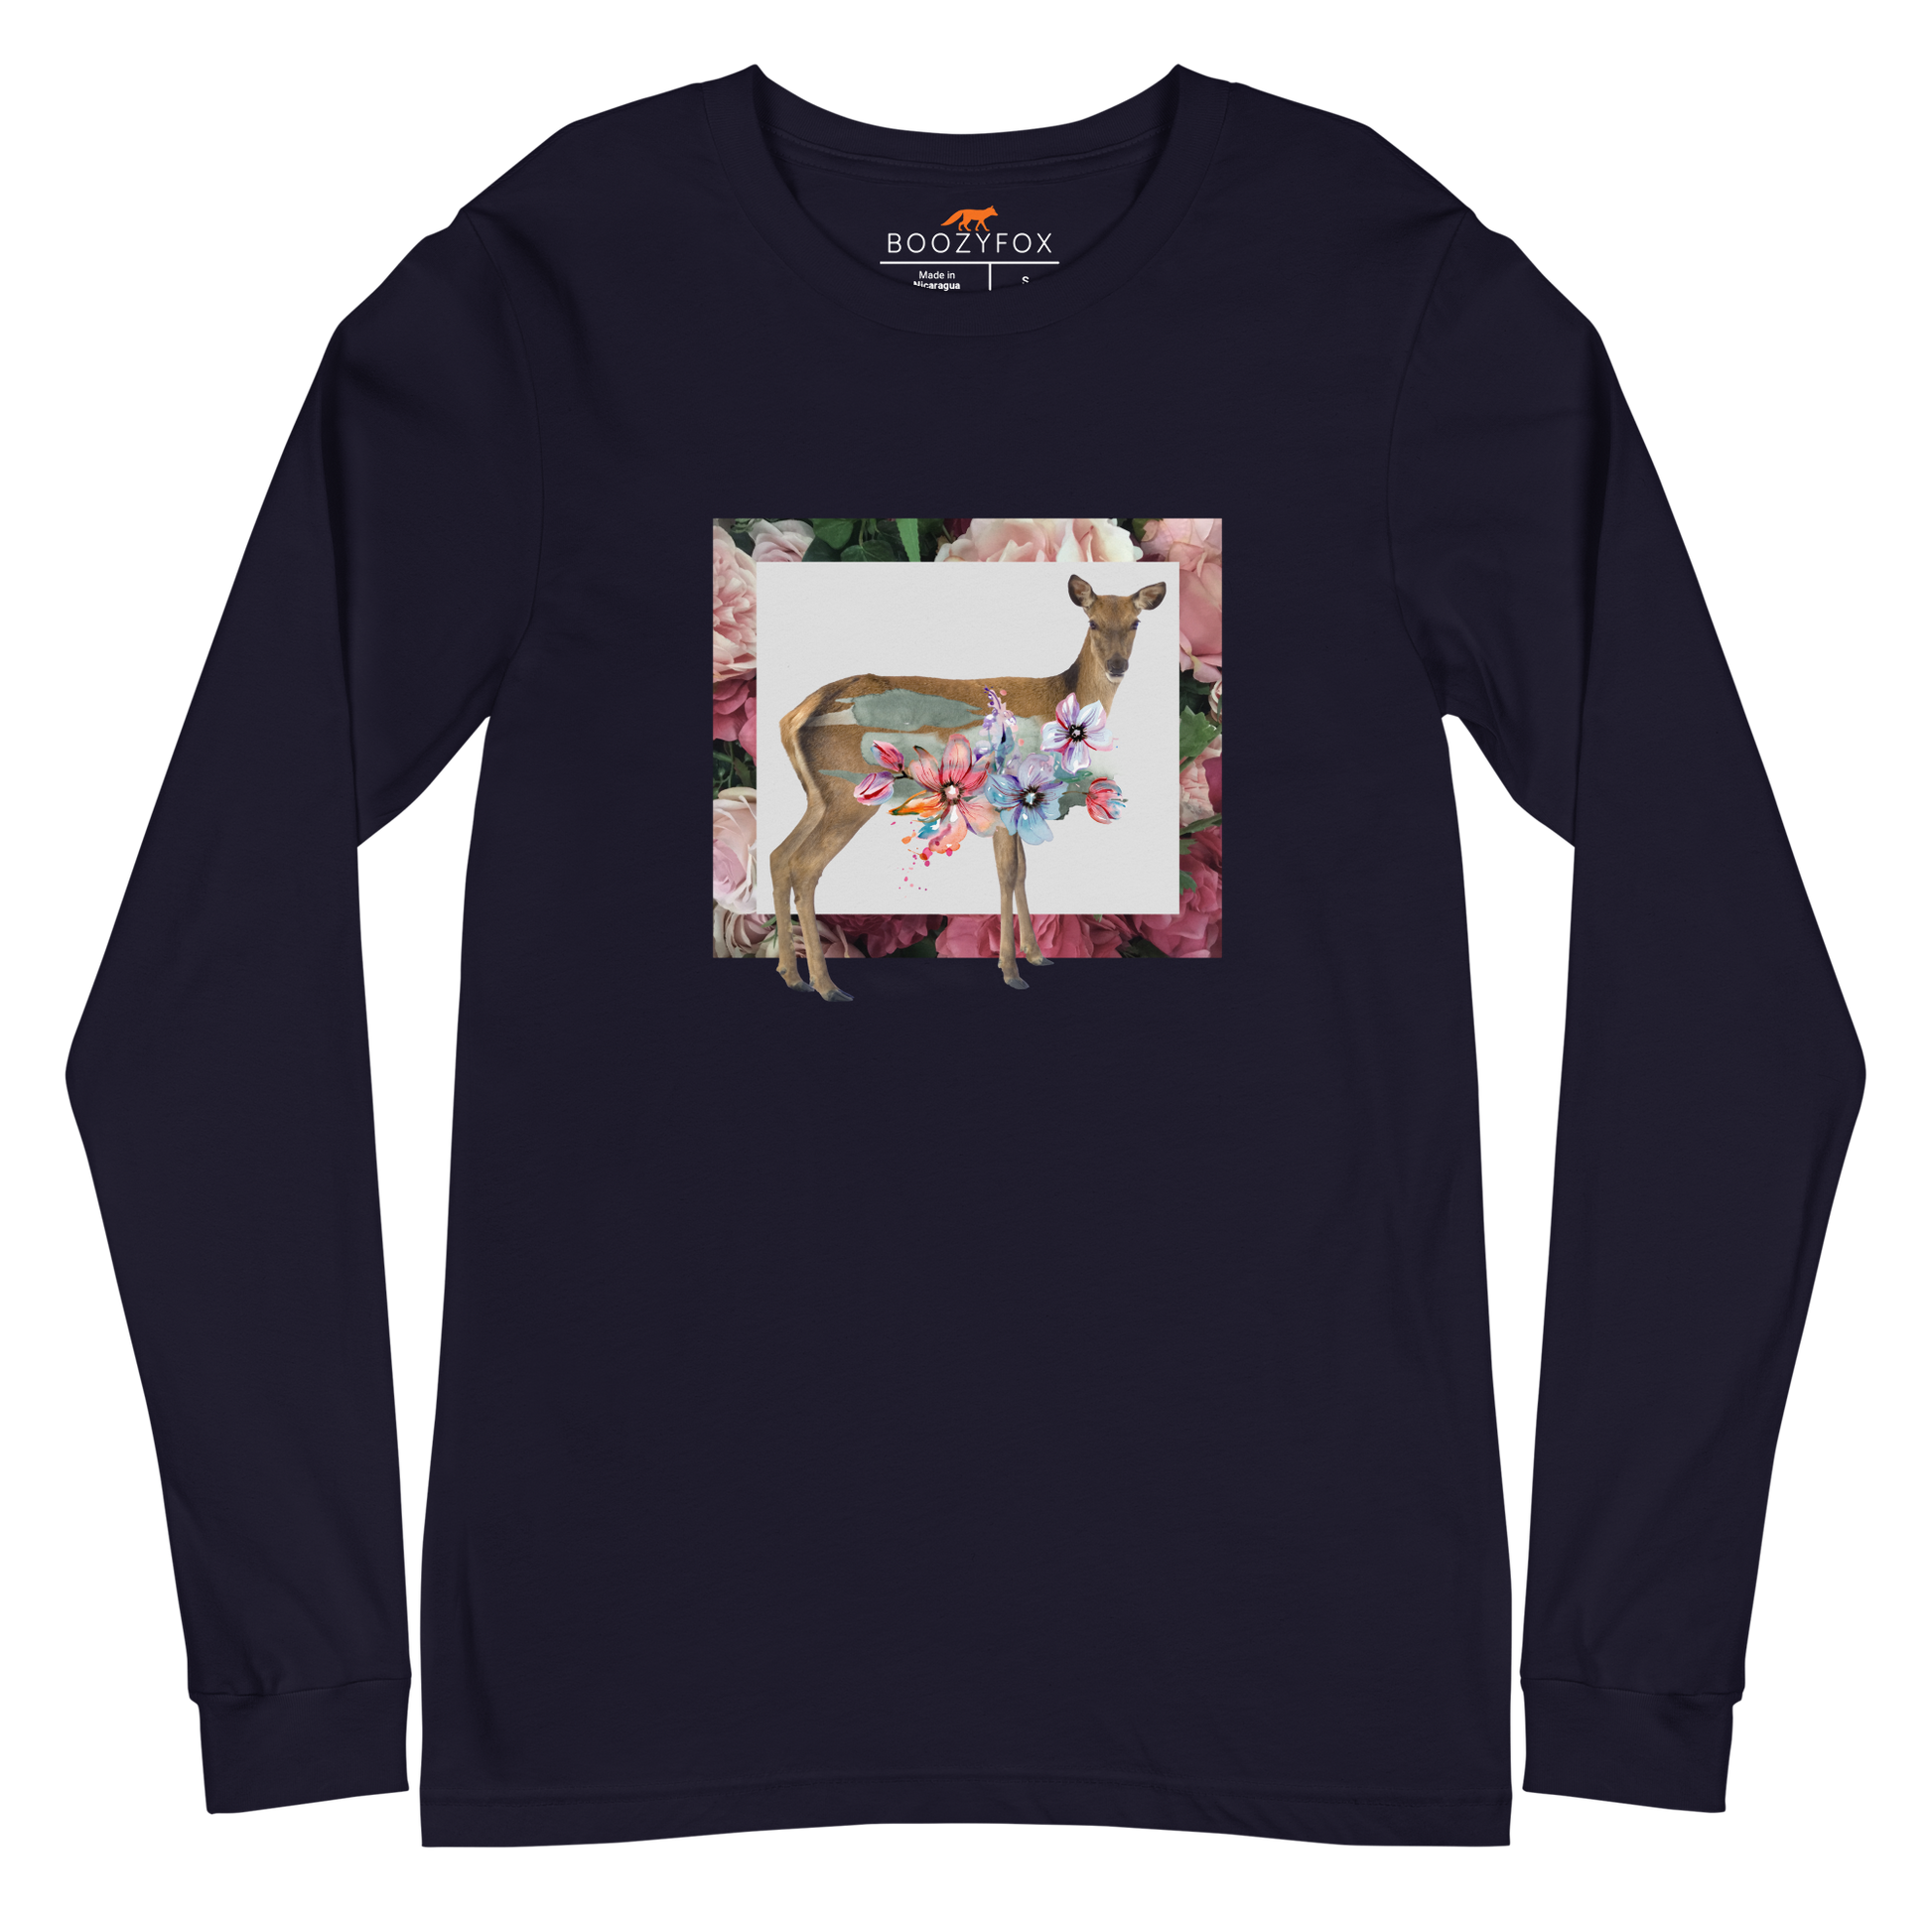 Navy Deer Long Sleeve Tee featuring a captivating Floral Deer graphic on the chest - Cute Deer Long Sleeve Graphic Tees - Boozy Fox